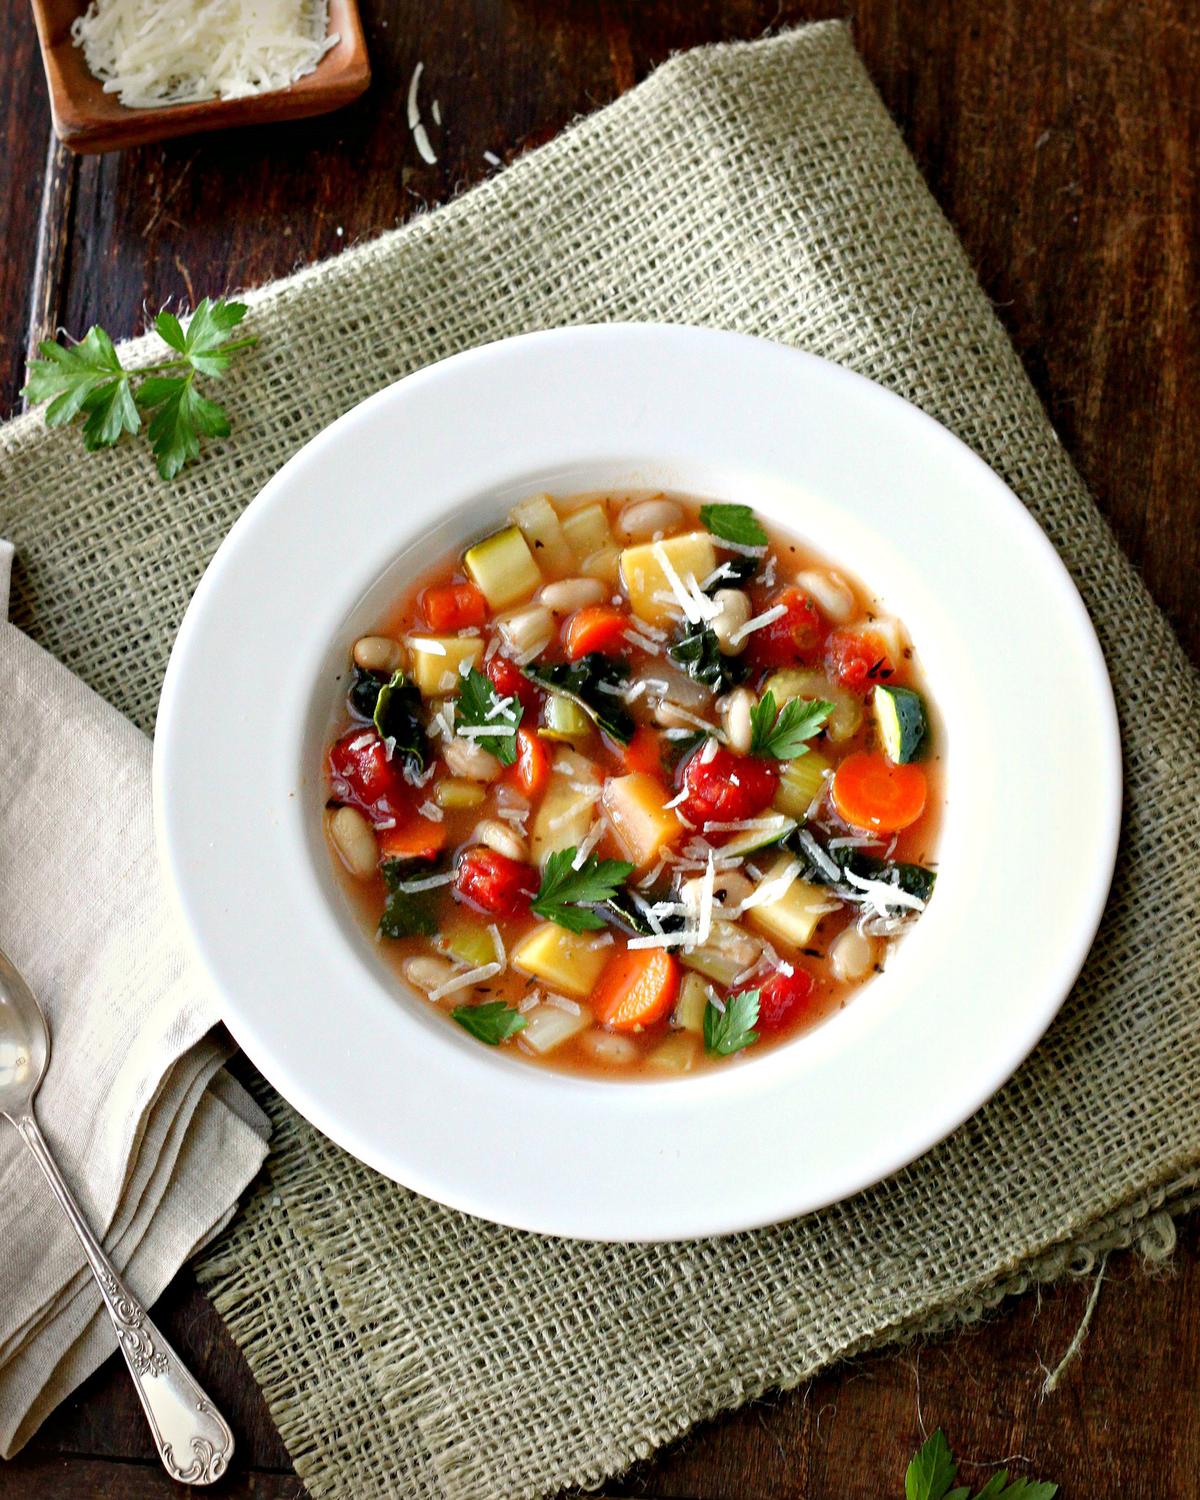 Brimming with diced vegetables swirling in a tomato-infused stock, minestrone is rustic, filling, and layered with flavor. (Lynda Balslev for TasteFood)